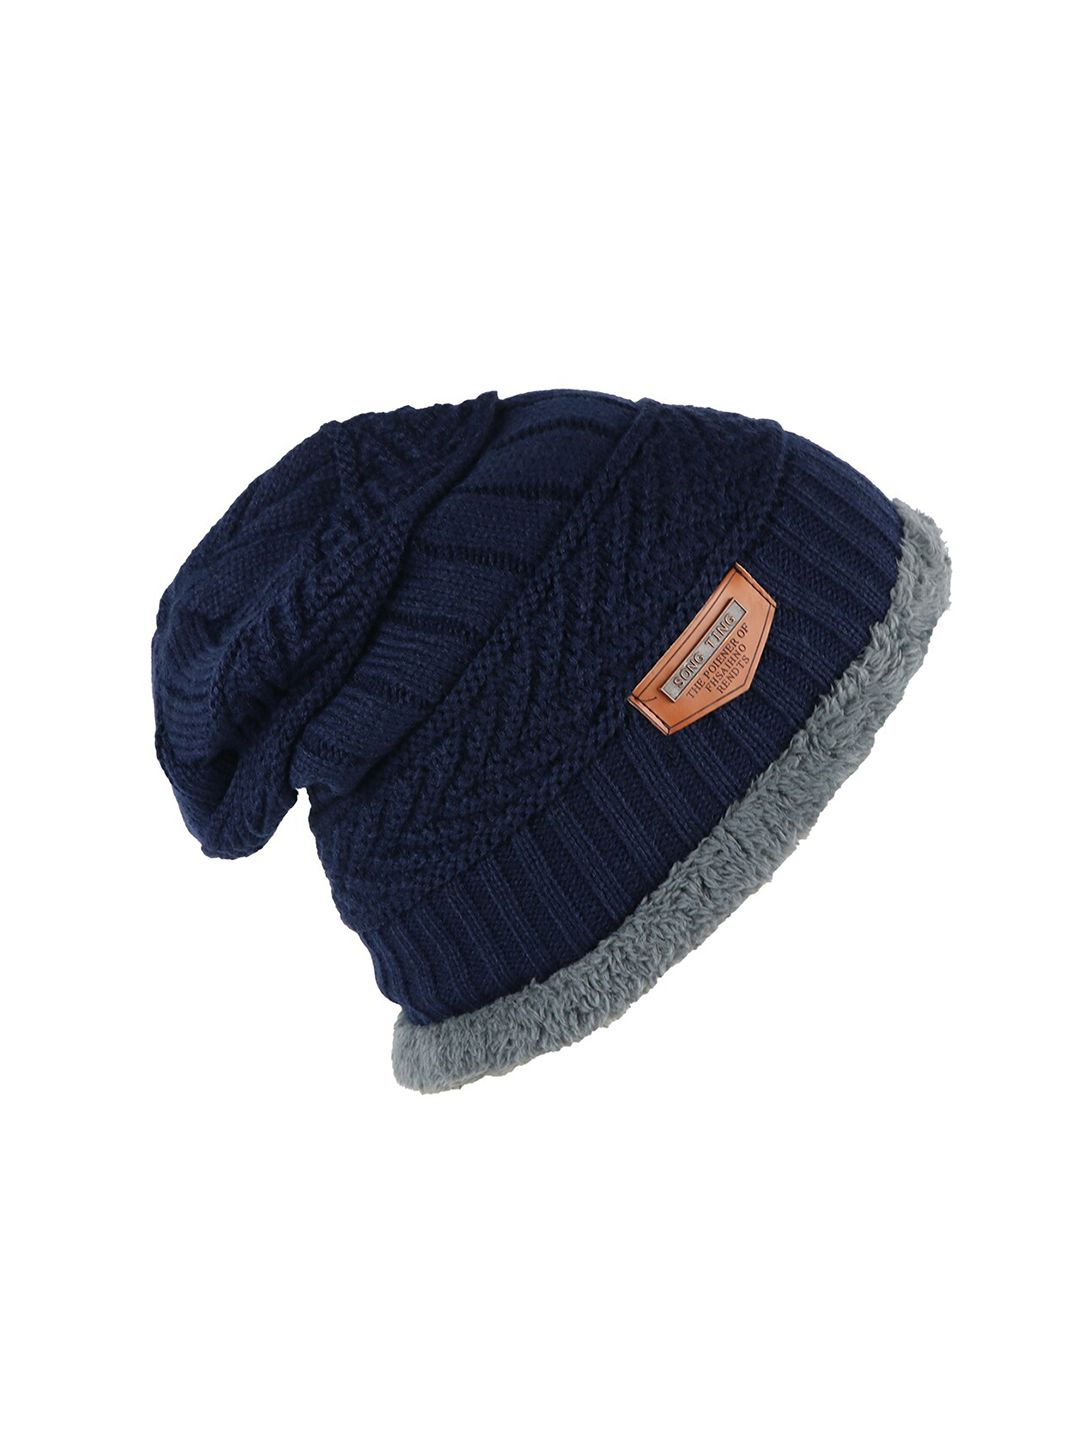 iSWEVEN Unisex Navy Blue Winter Beanie Cap with Inner Fur Price in India